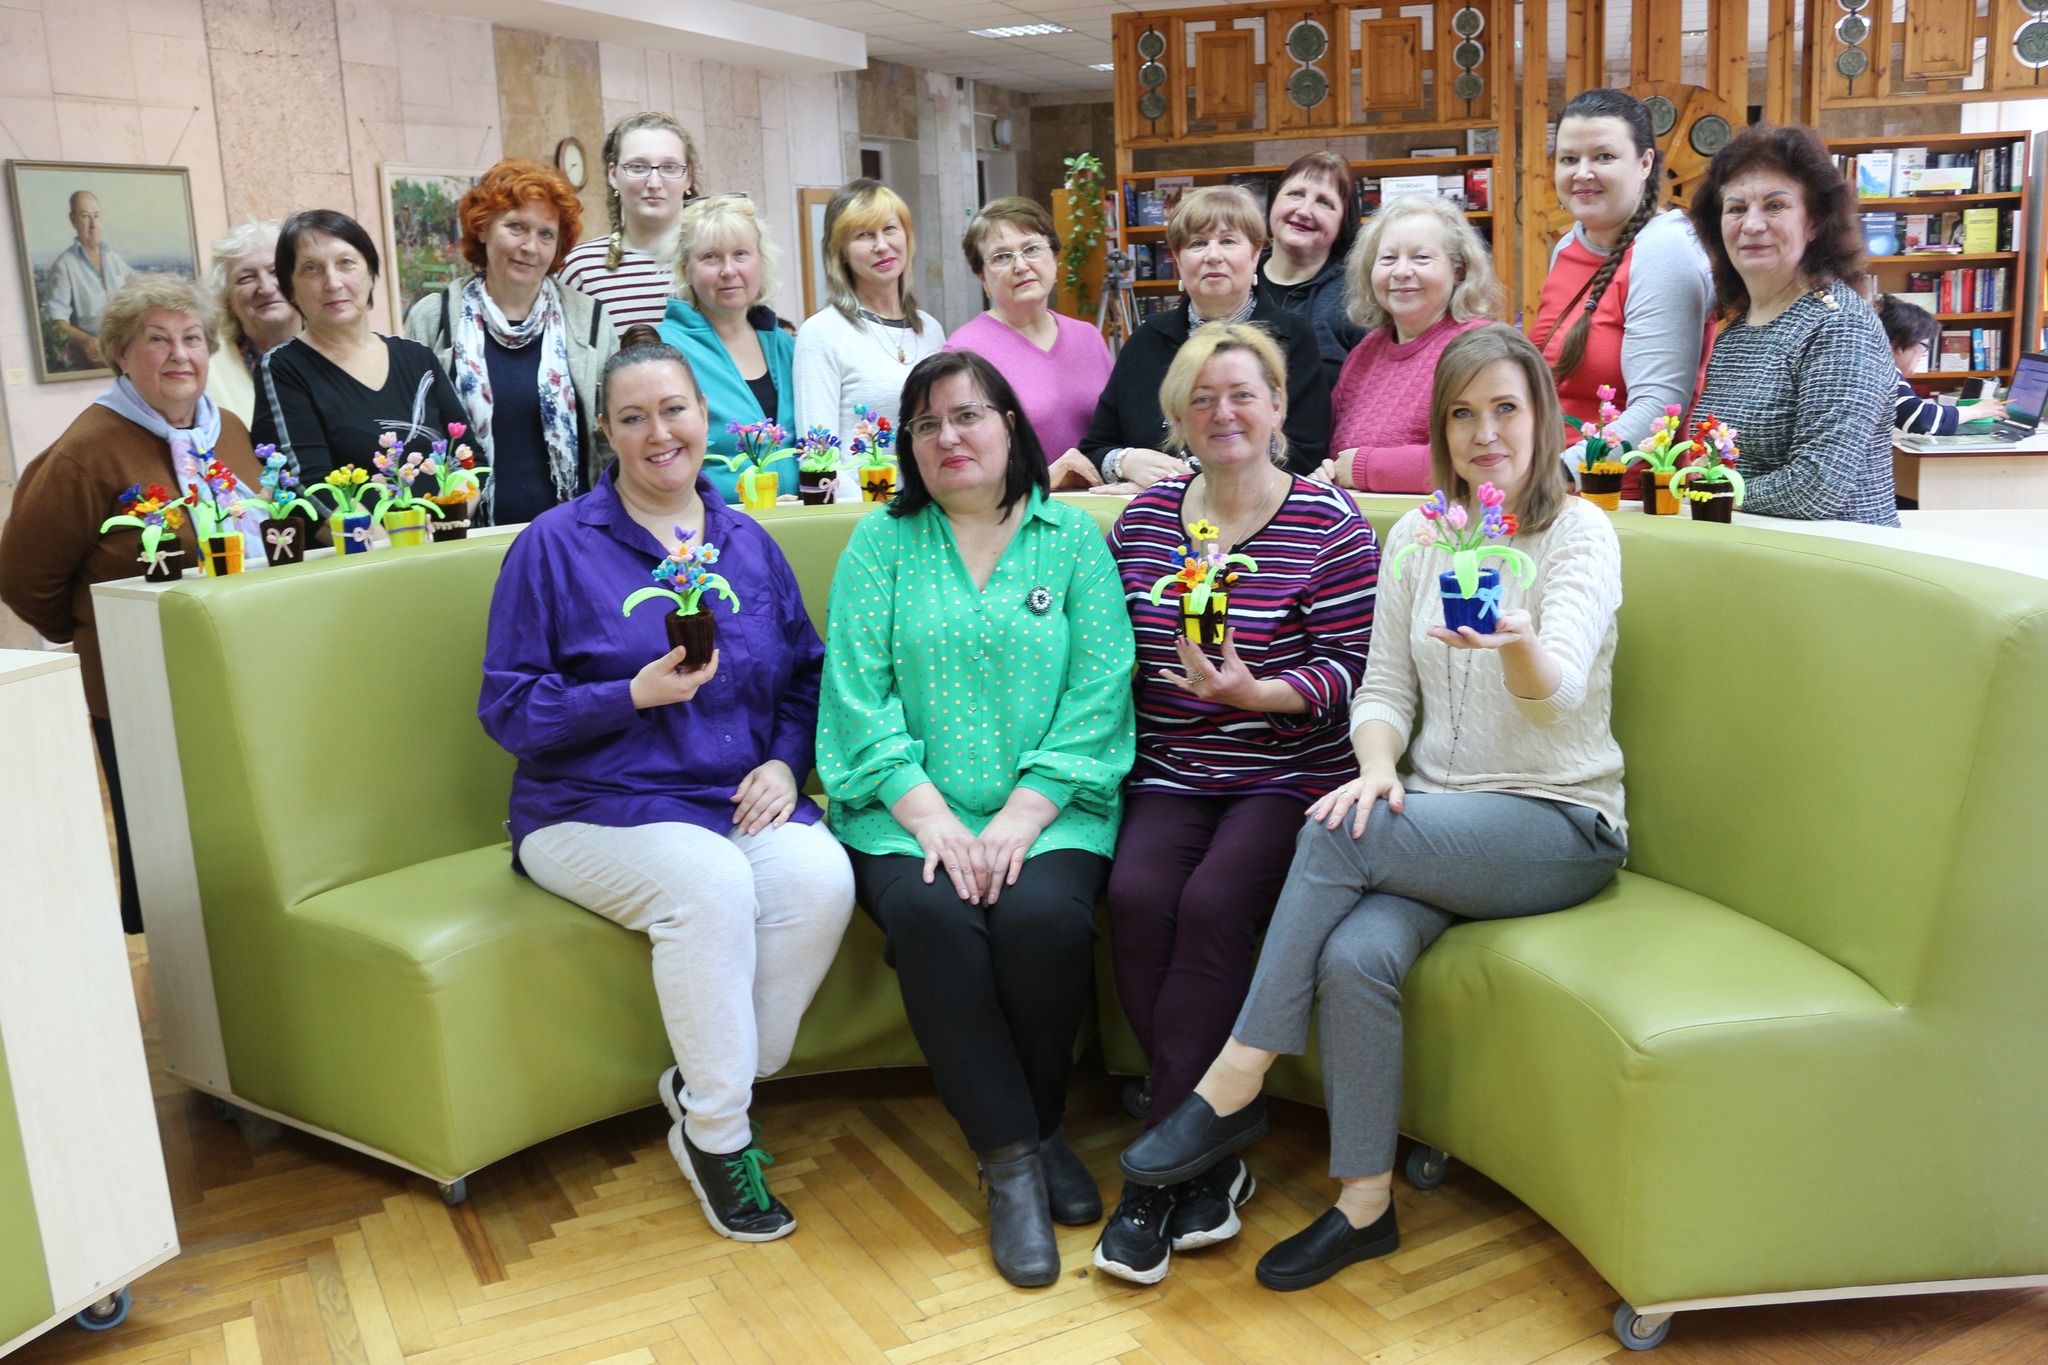 Regular visitors of the library workshops tried their hand at making flowers from chenille wire